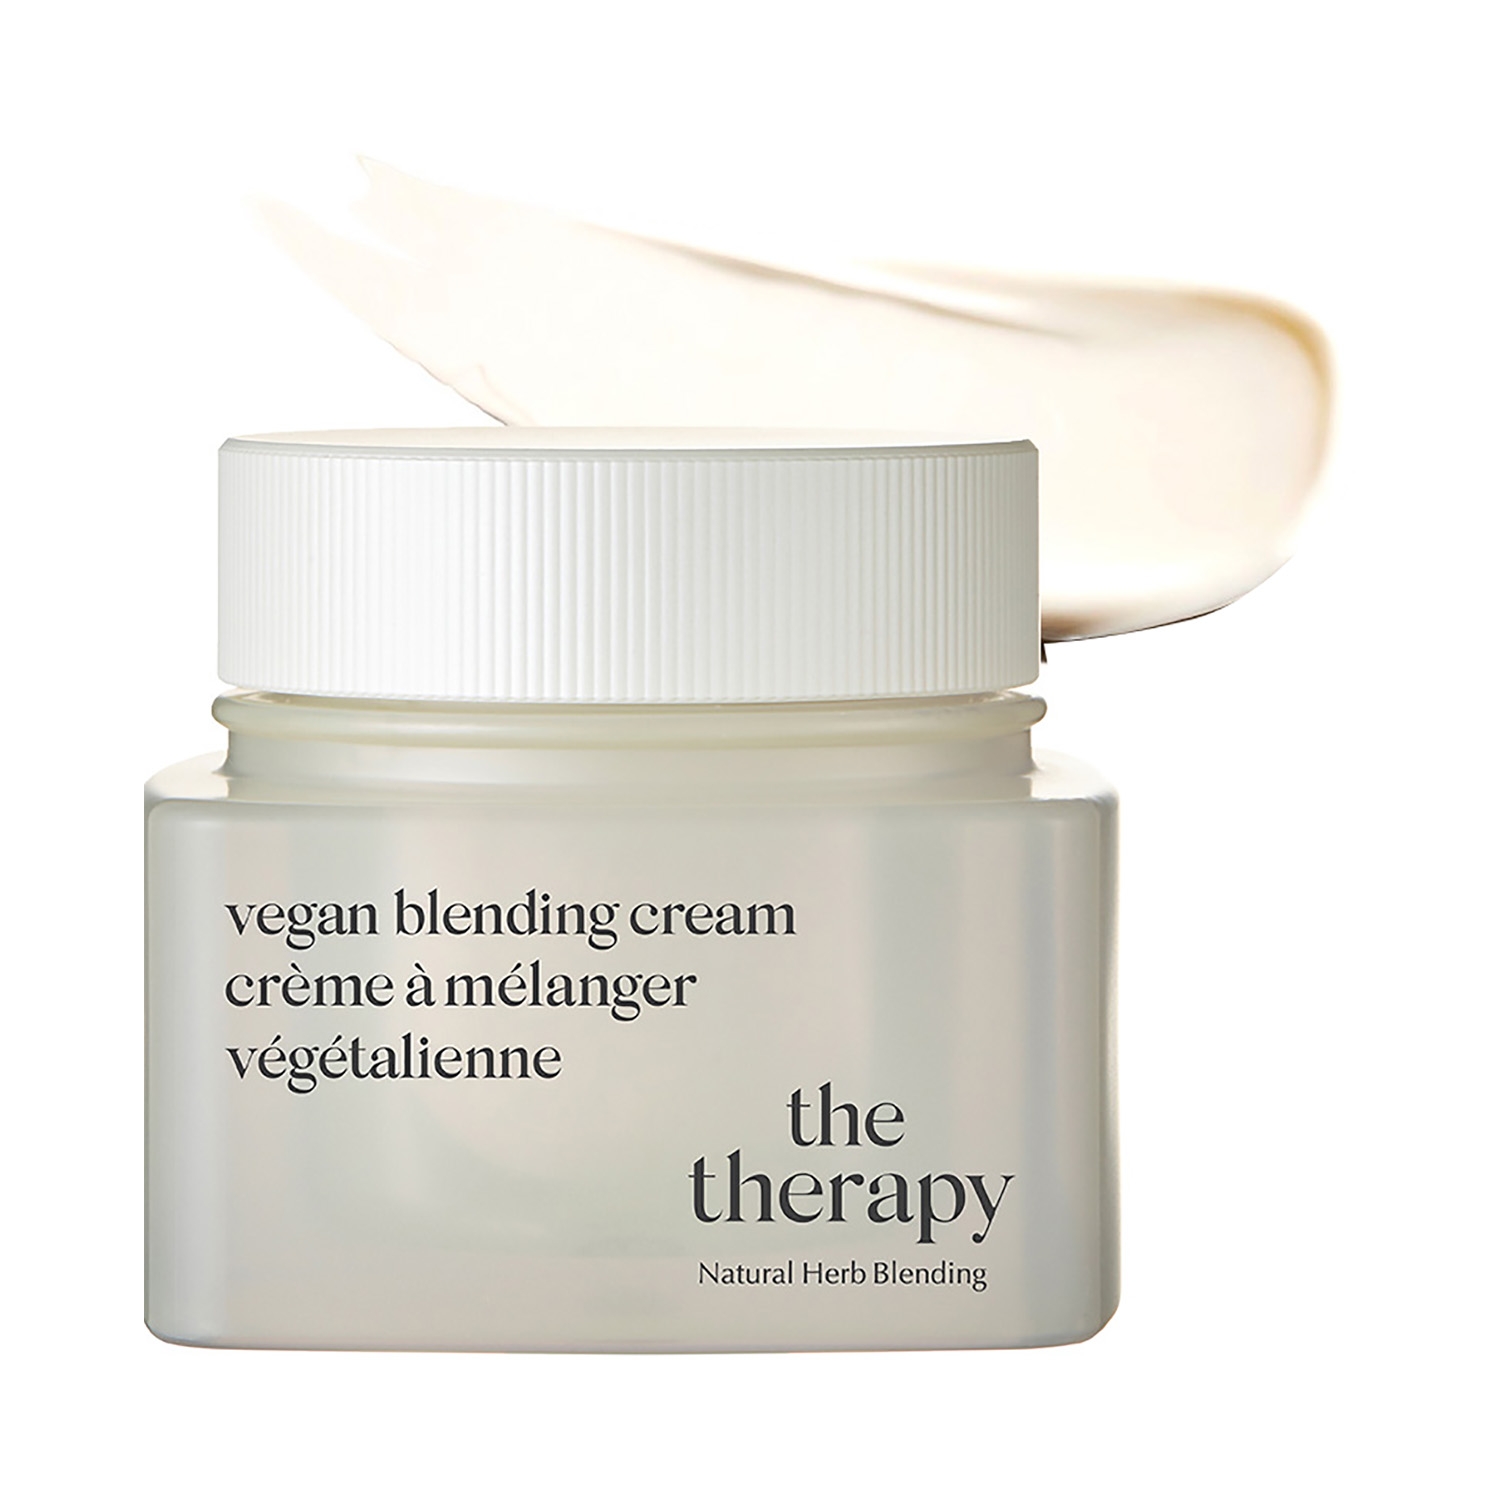 The Face Shop The Therapy Vegan Blending Cream (60ml)